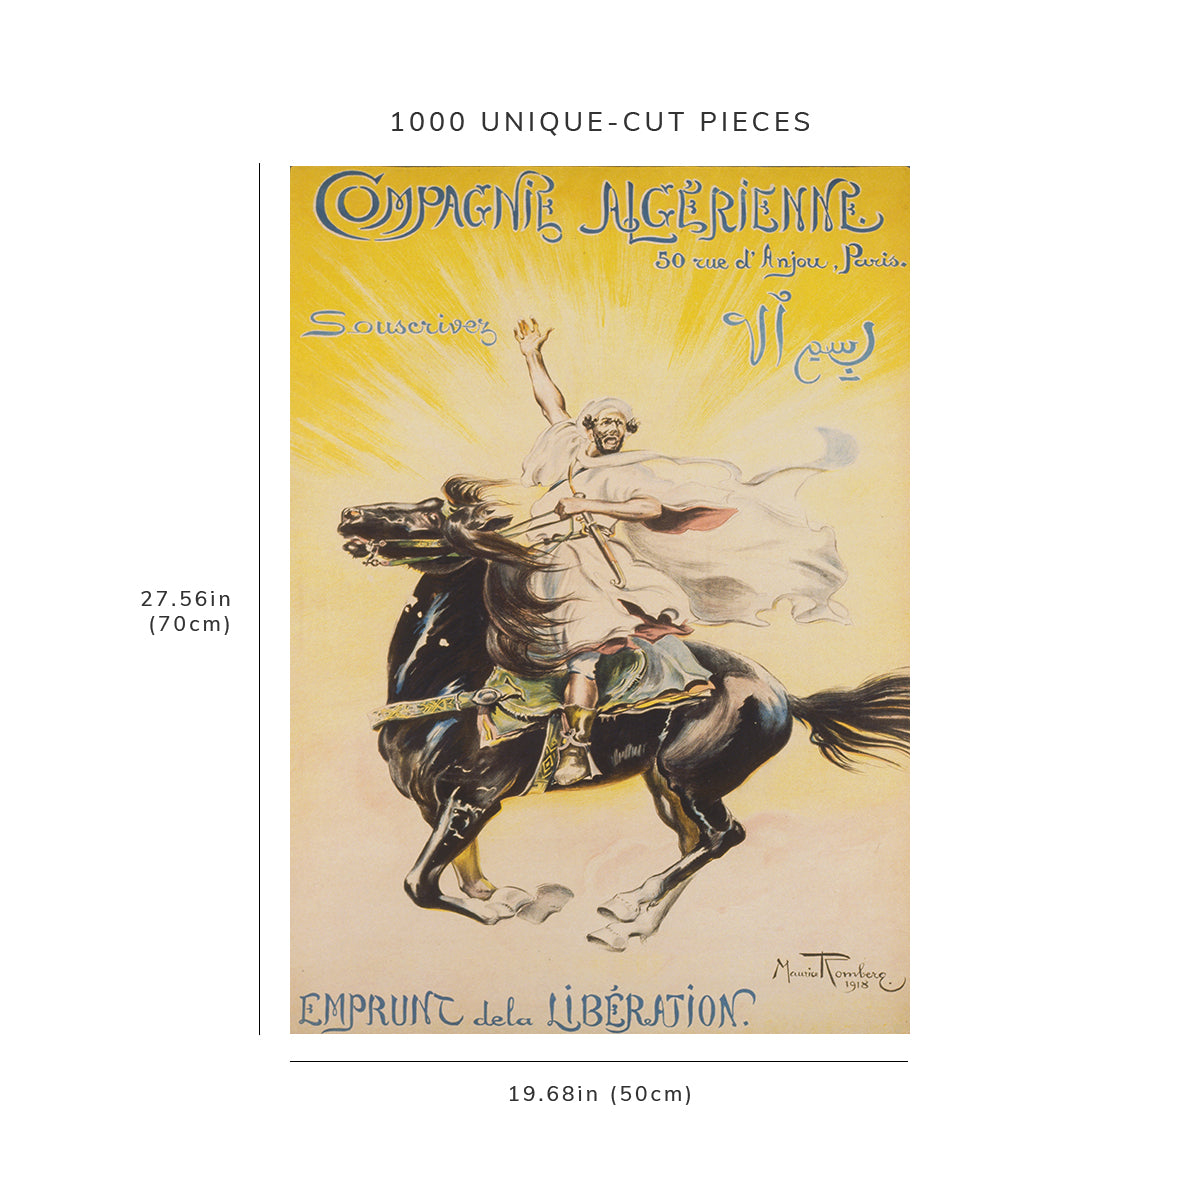 1000 piece puzzle: 1918 | Compagnie Algerienne | Maurice Romberg